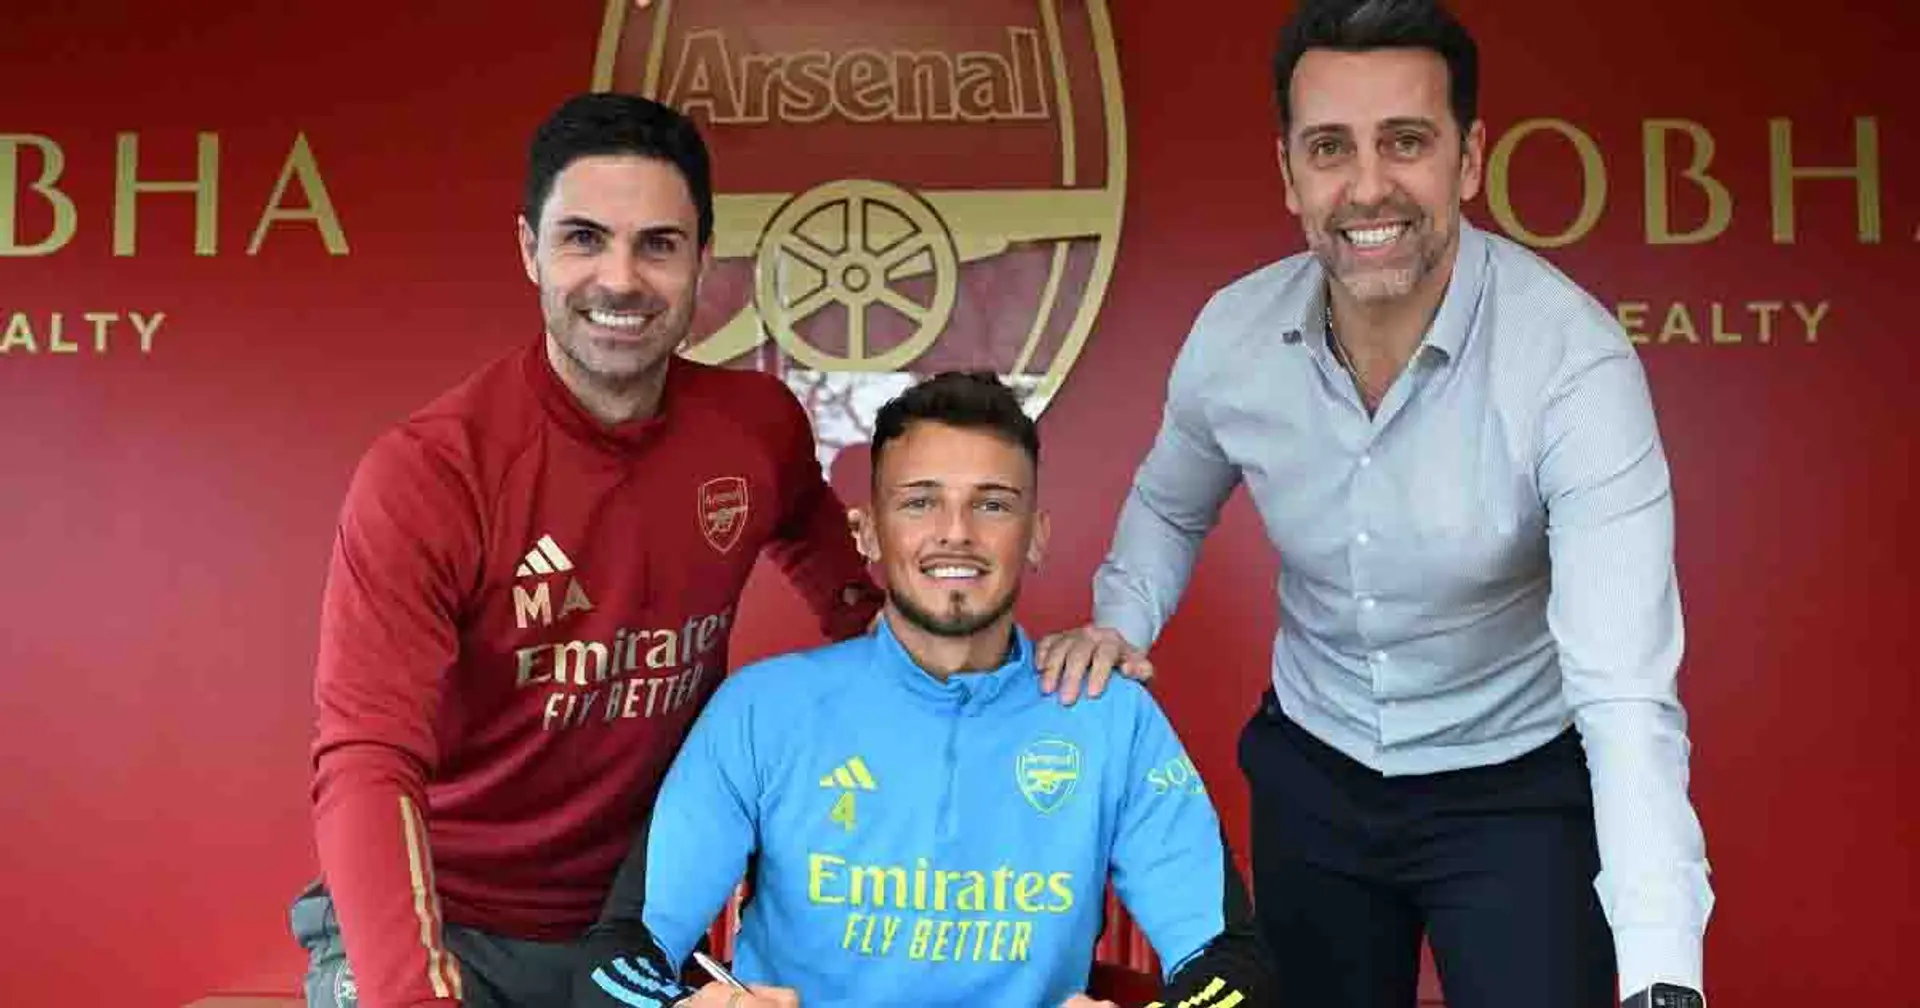 Ben White signs new Arsenal contract & 3 more big stories you might've missed